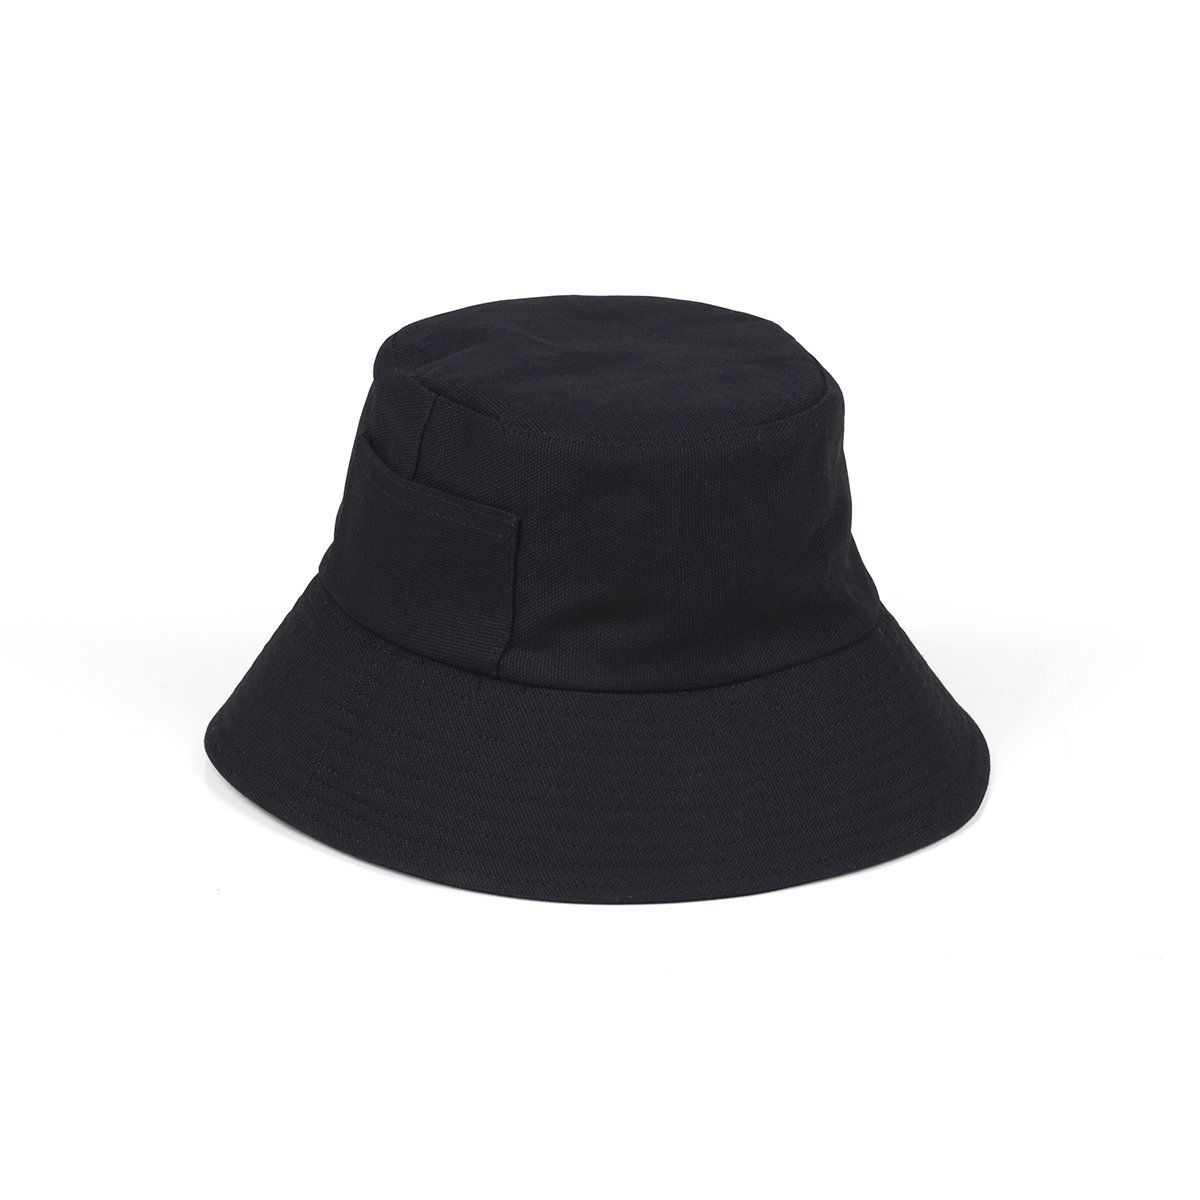 foreign hats list